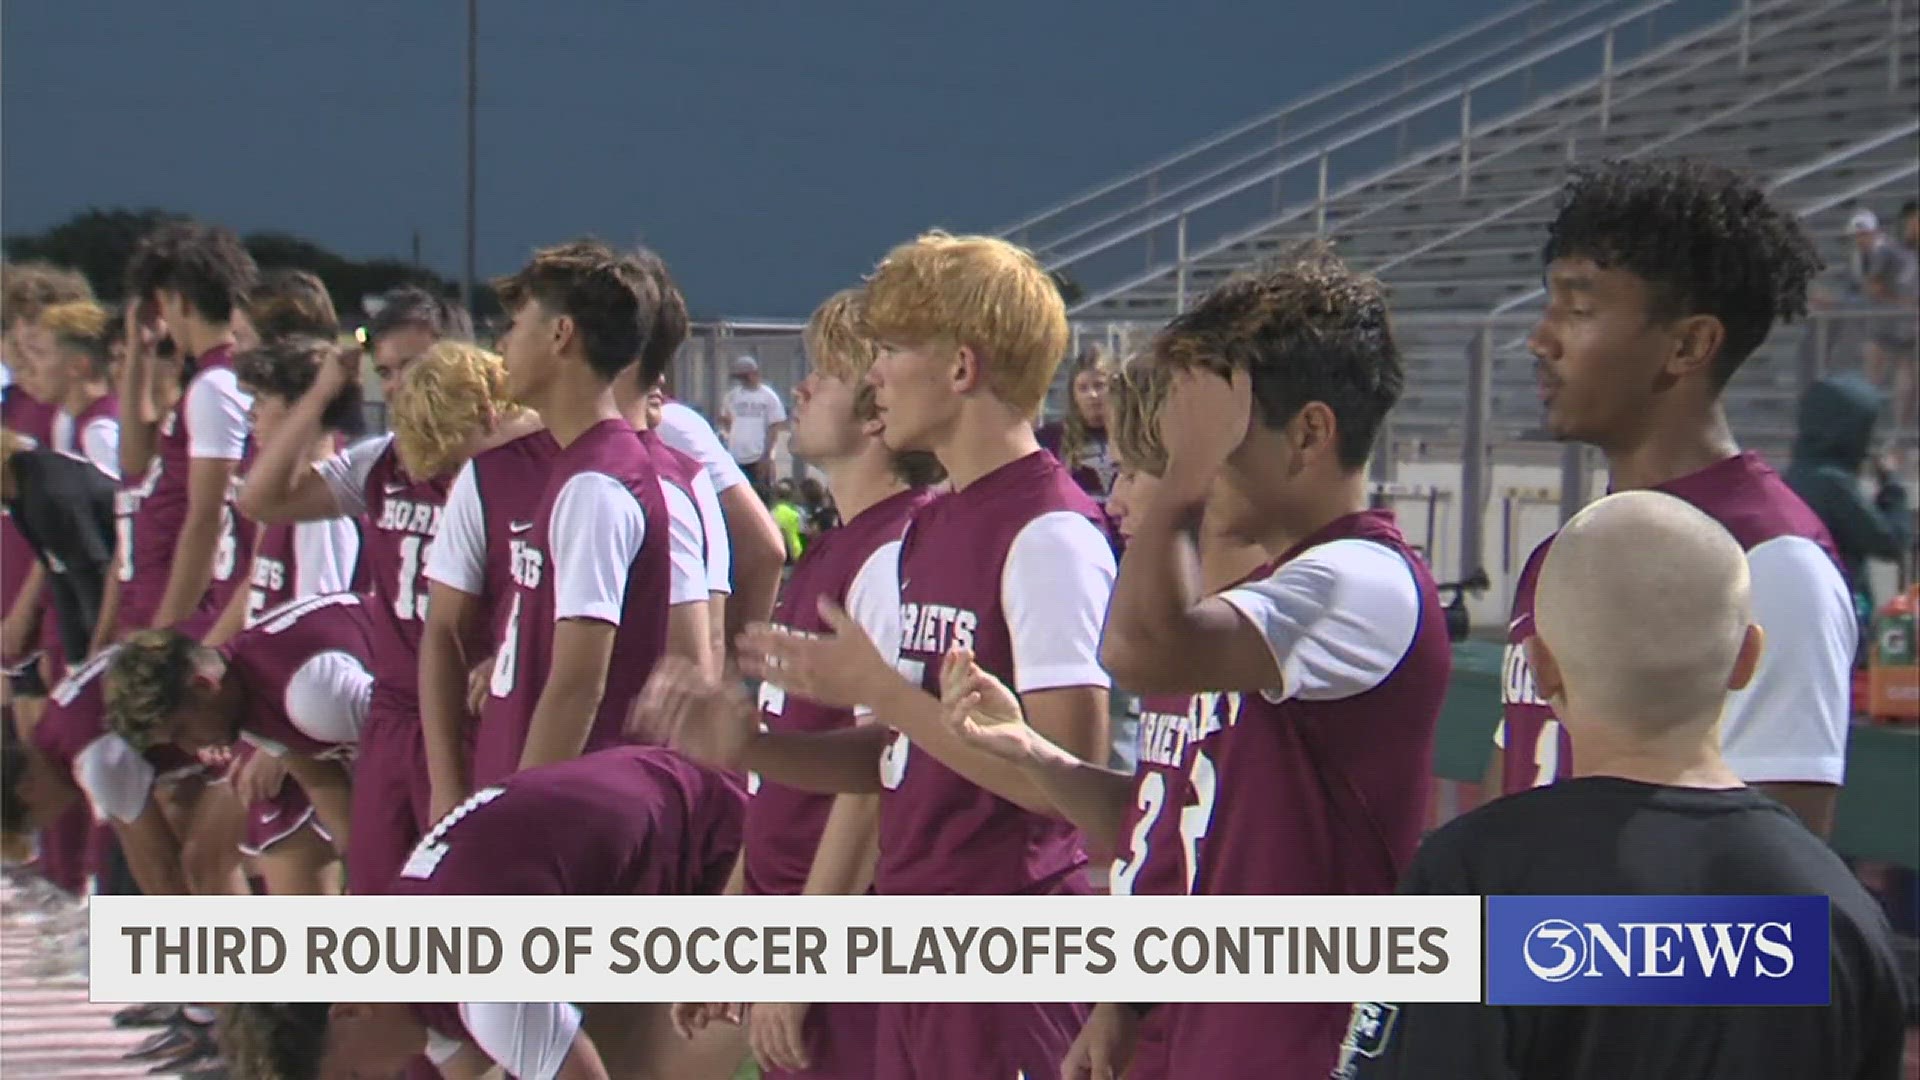 The Flour Bluff boys move on. The Bluff and G-P girls fall. The London girls shut out Beeville Jones to advance.